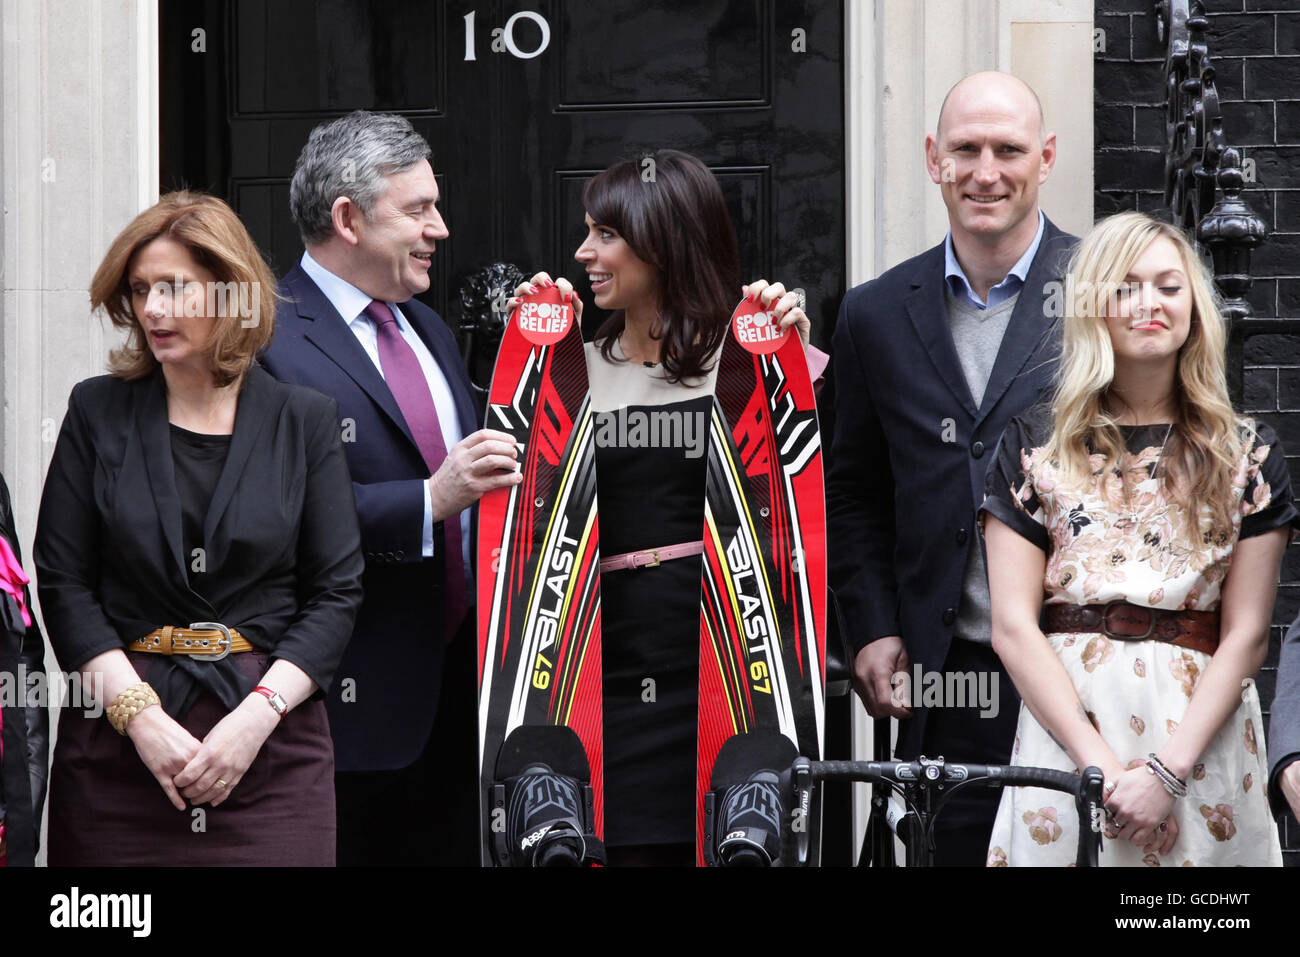 Prime Minister Gordon Brown and wife Sarah meet Sport Relief celebrity challengers (from left) Christine Bleakley, Lawrence Dallaglio and Fearne Cotton who have raised money as part of Sport Relief, outside No 10 Downing Street in central London. Stock Photo